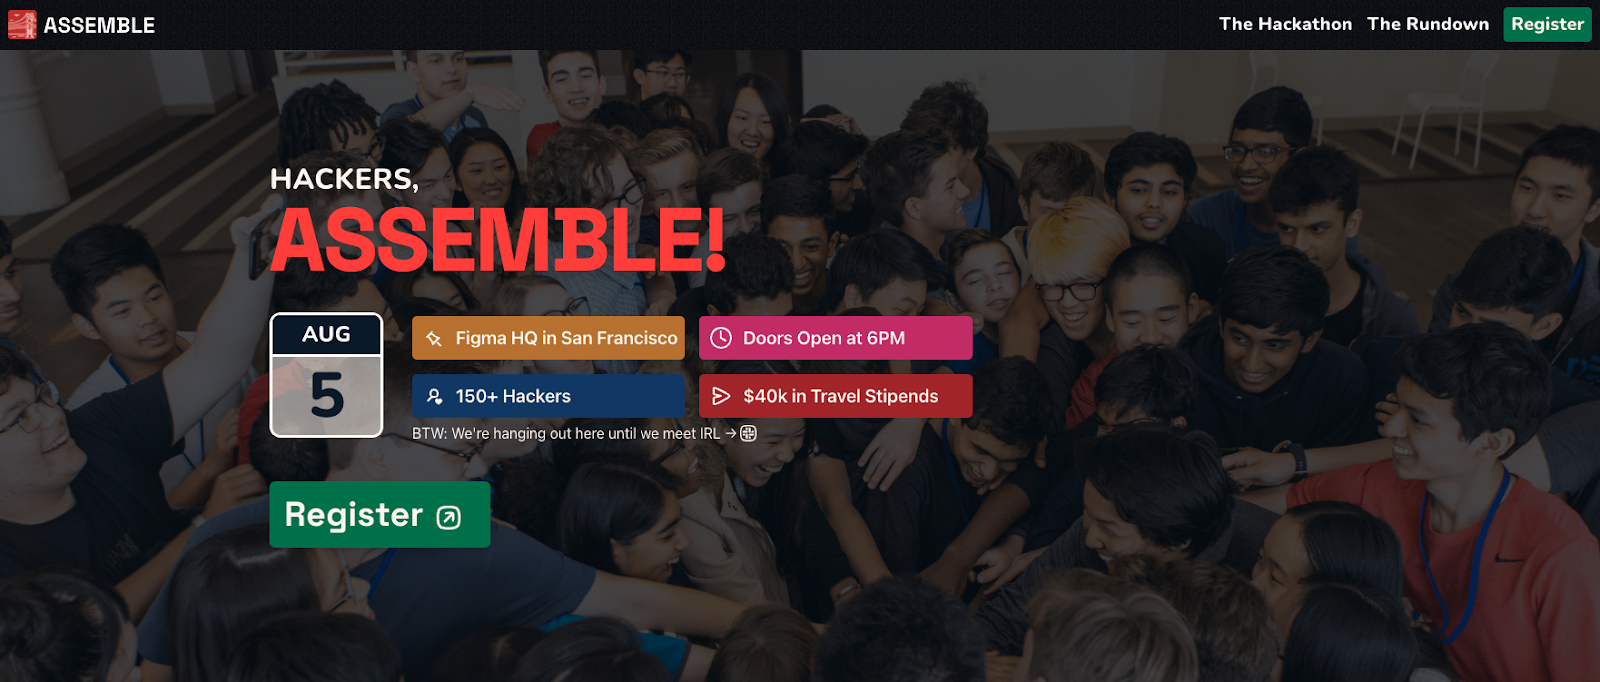 Hack Club's registration page for Assemble, our upcoming hackathon